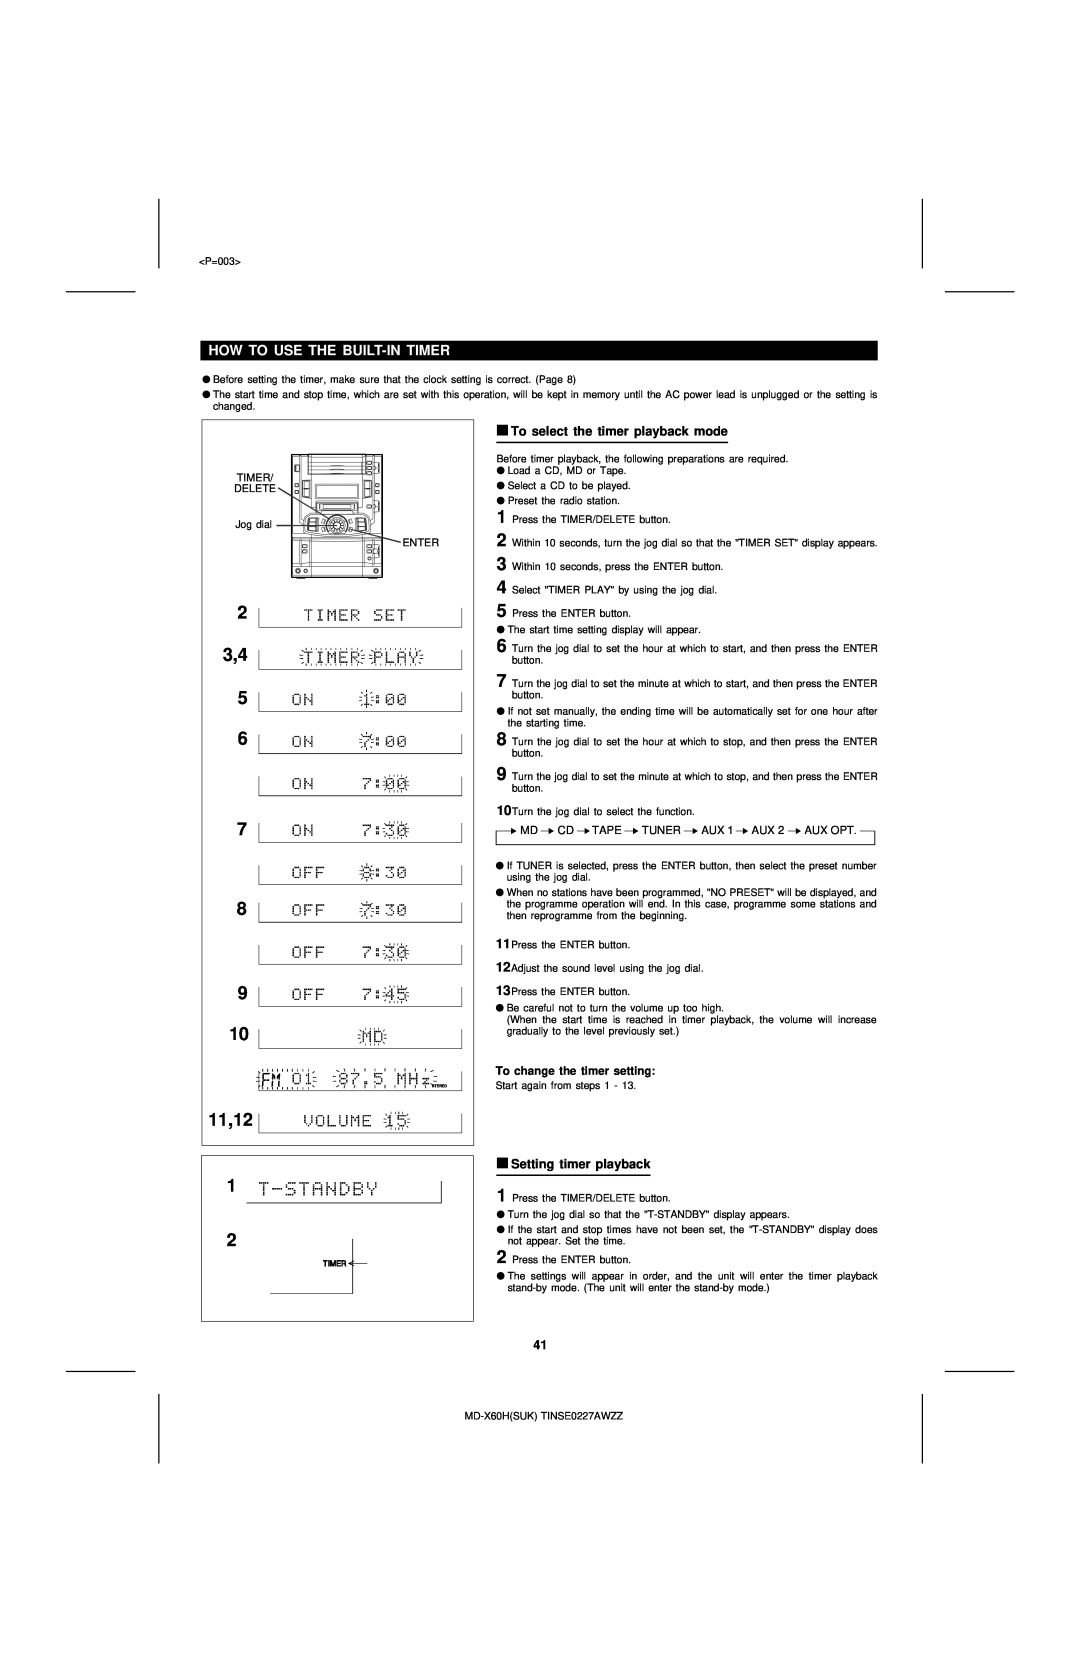 Sharp MD-X60H operation manual 11,12, How To Use The Built-Intimer 